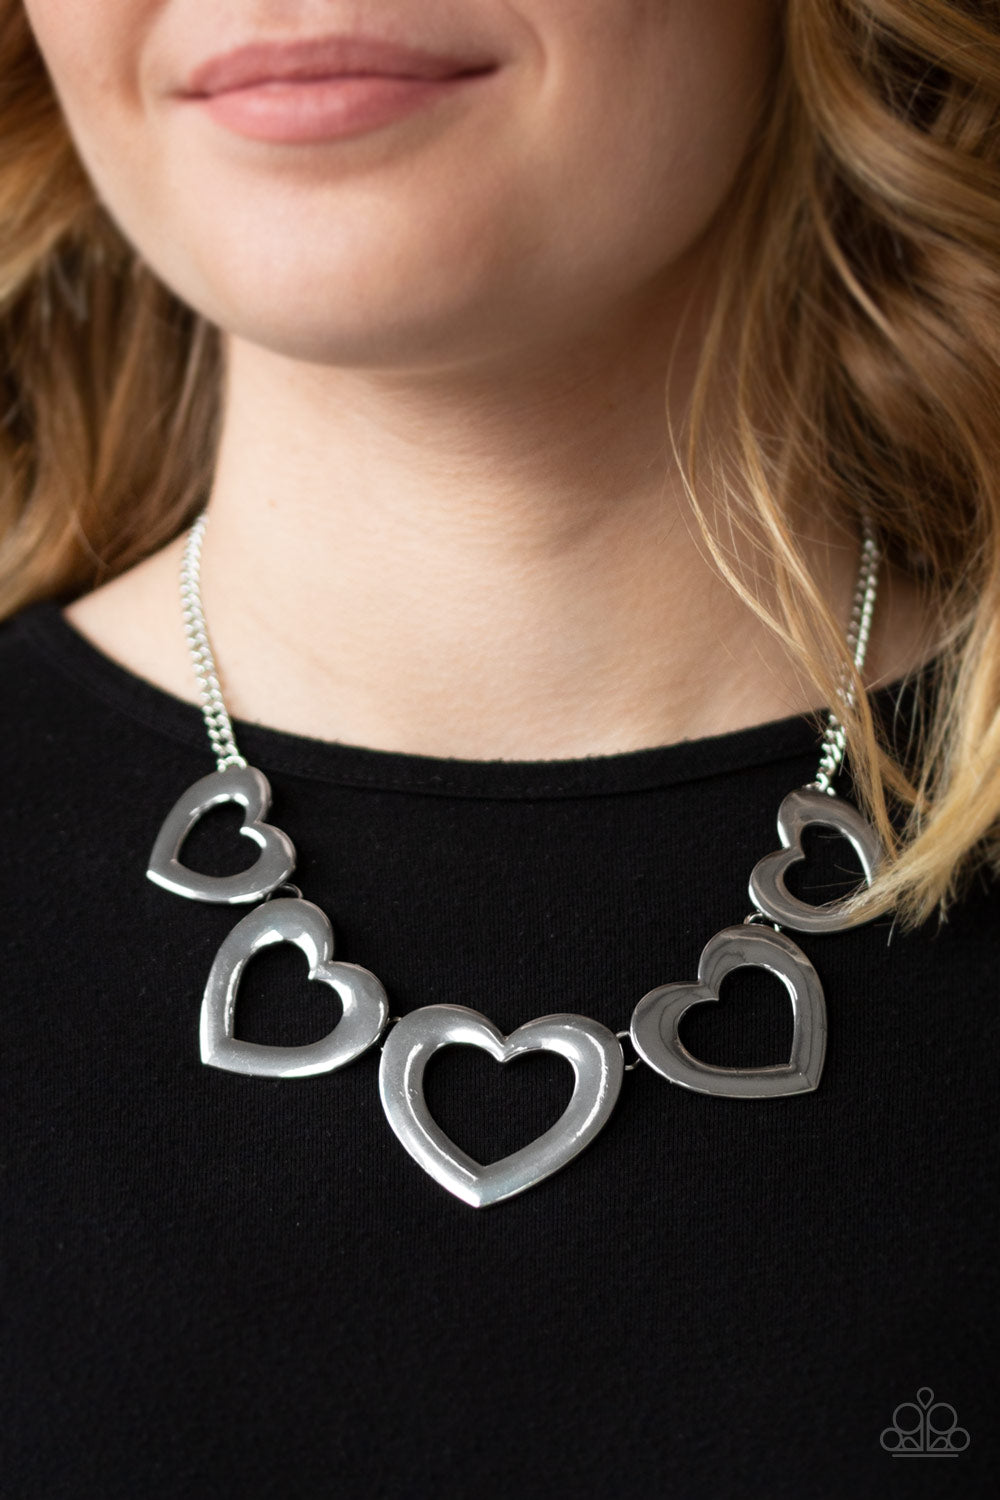 Paparazzi Hearty Hearts Silver Necklace. Led and Nickel Free $5 Valentine Jewelry at ATB